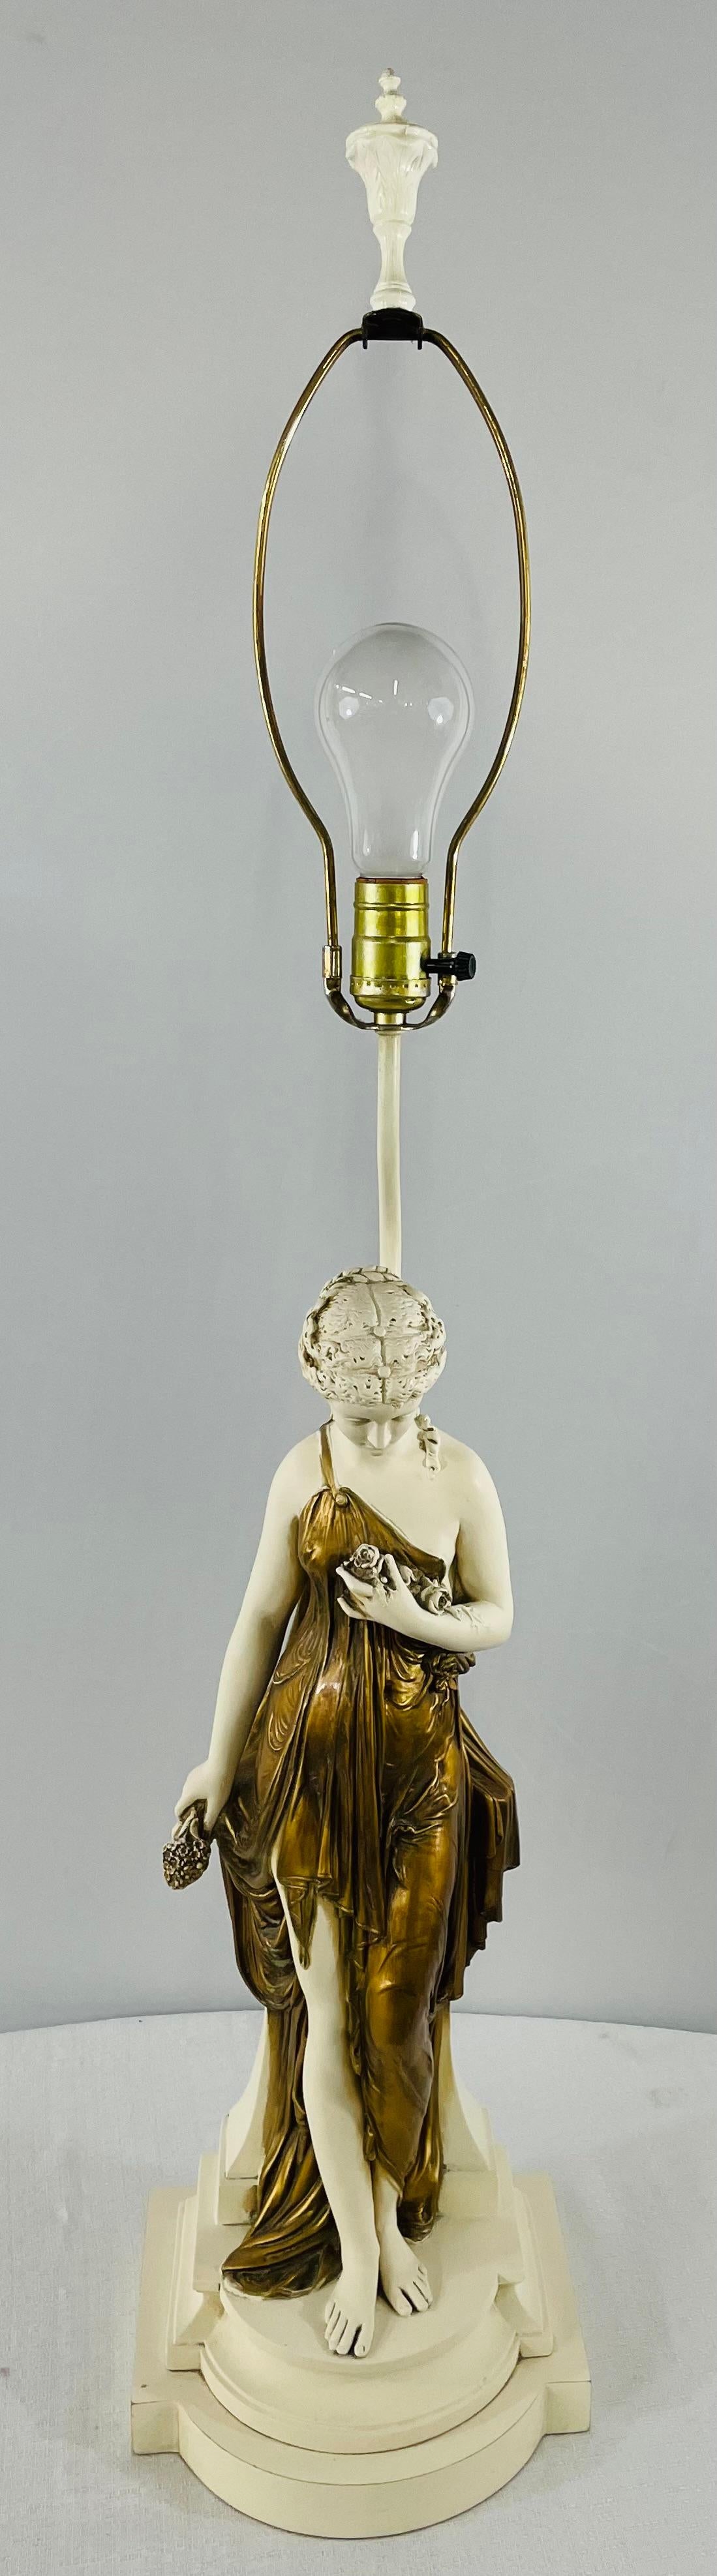 An exquisite large Art Nouveau female Nymph sculpture lamp made of porcelain. The nymph is wrapped in a gold dress and holding a bouquet of flower while looking downward. The sculpture is standing on a base signed GRANITEX on the side. Granitex is